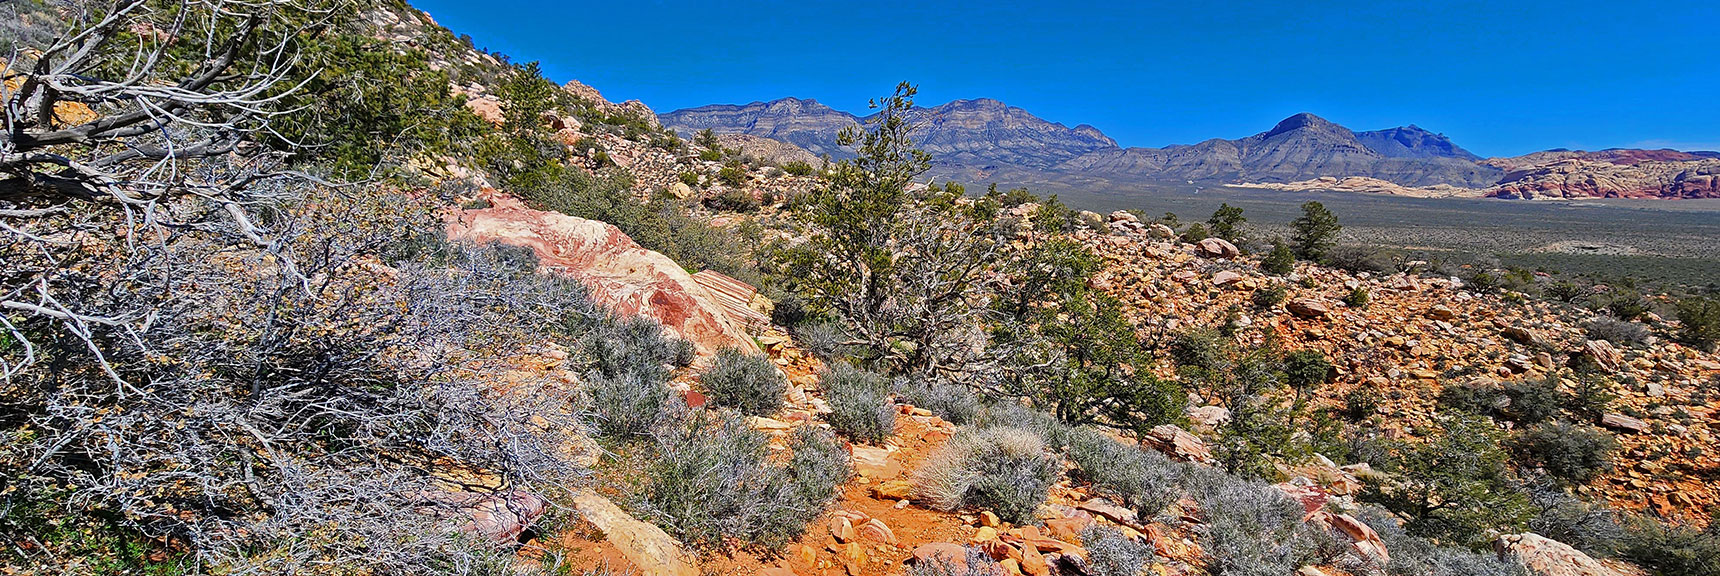 Rugged Arid Terrain; Sweeping Views Below the Entire Way | Dales Trail | Red Rock Canyon National Conservation Area, Nevada | David Smith | LasVegasAreaTrails.com